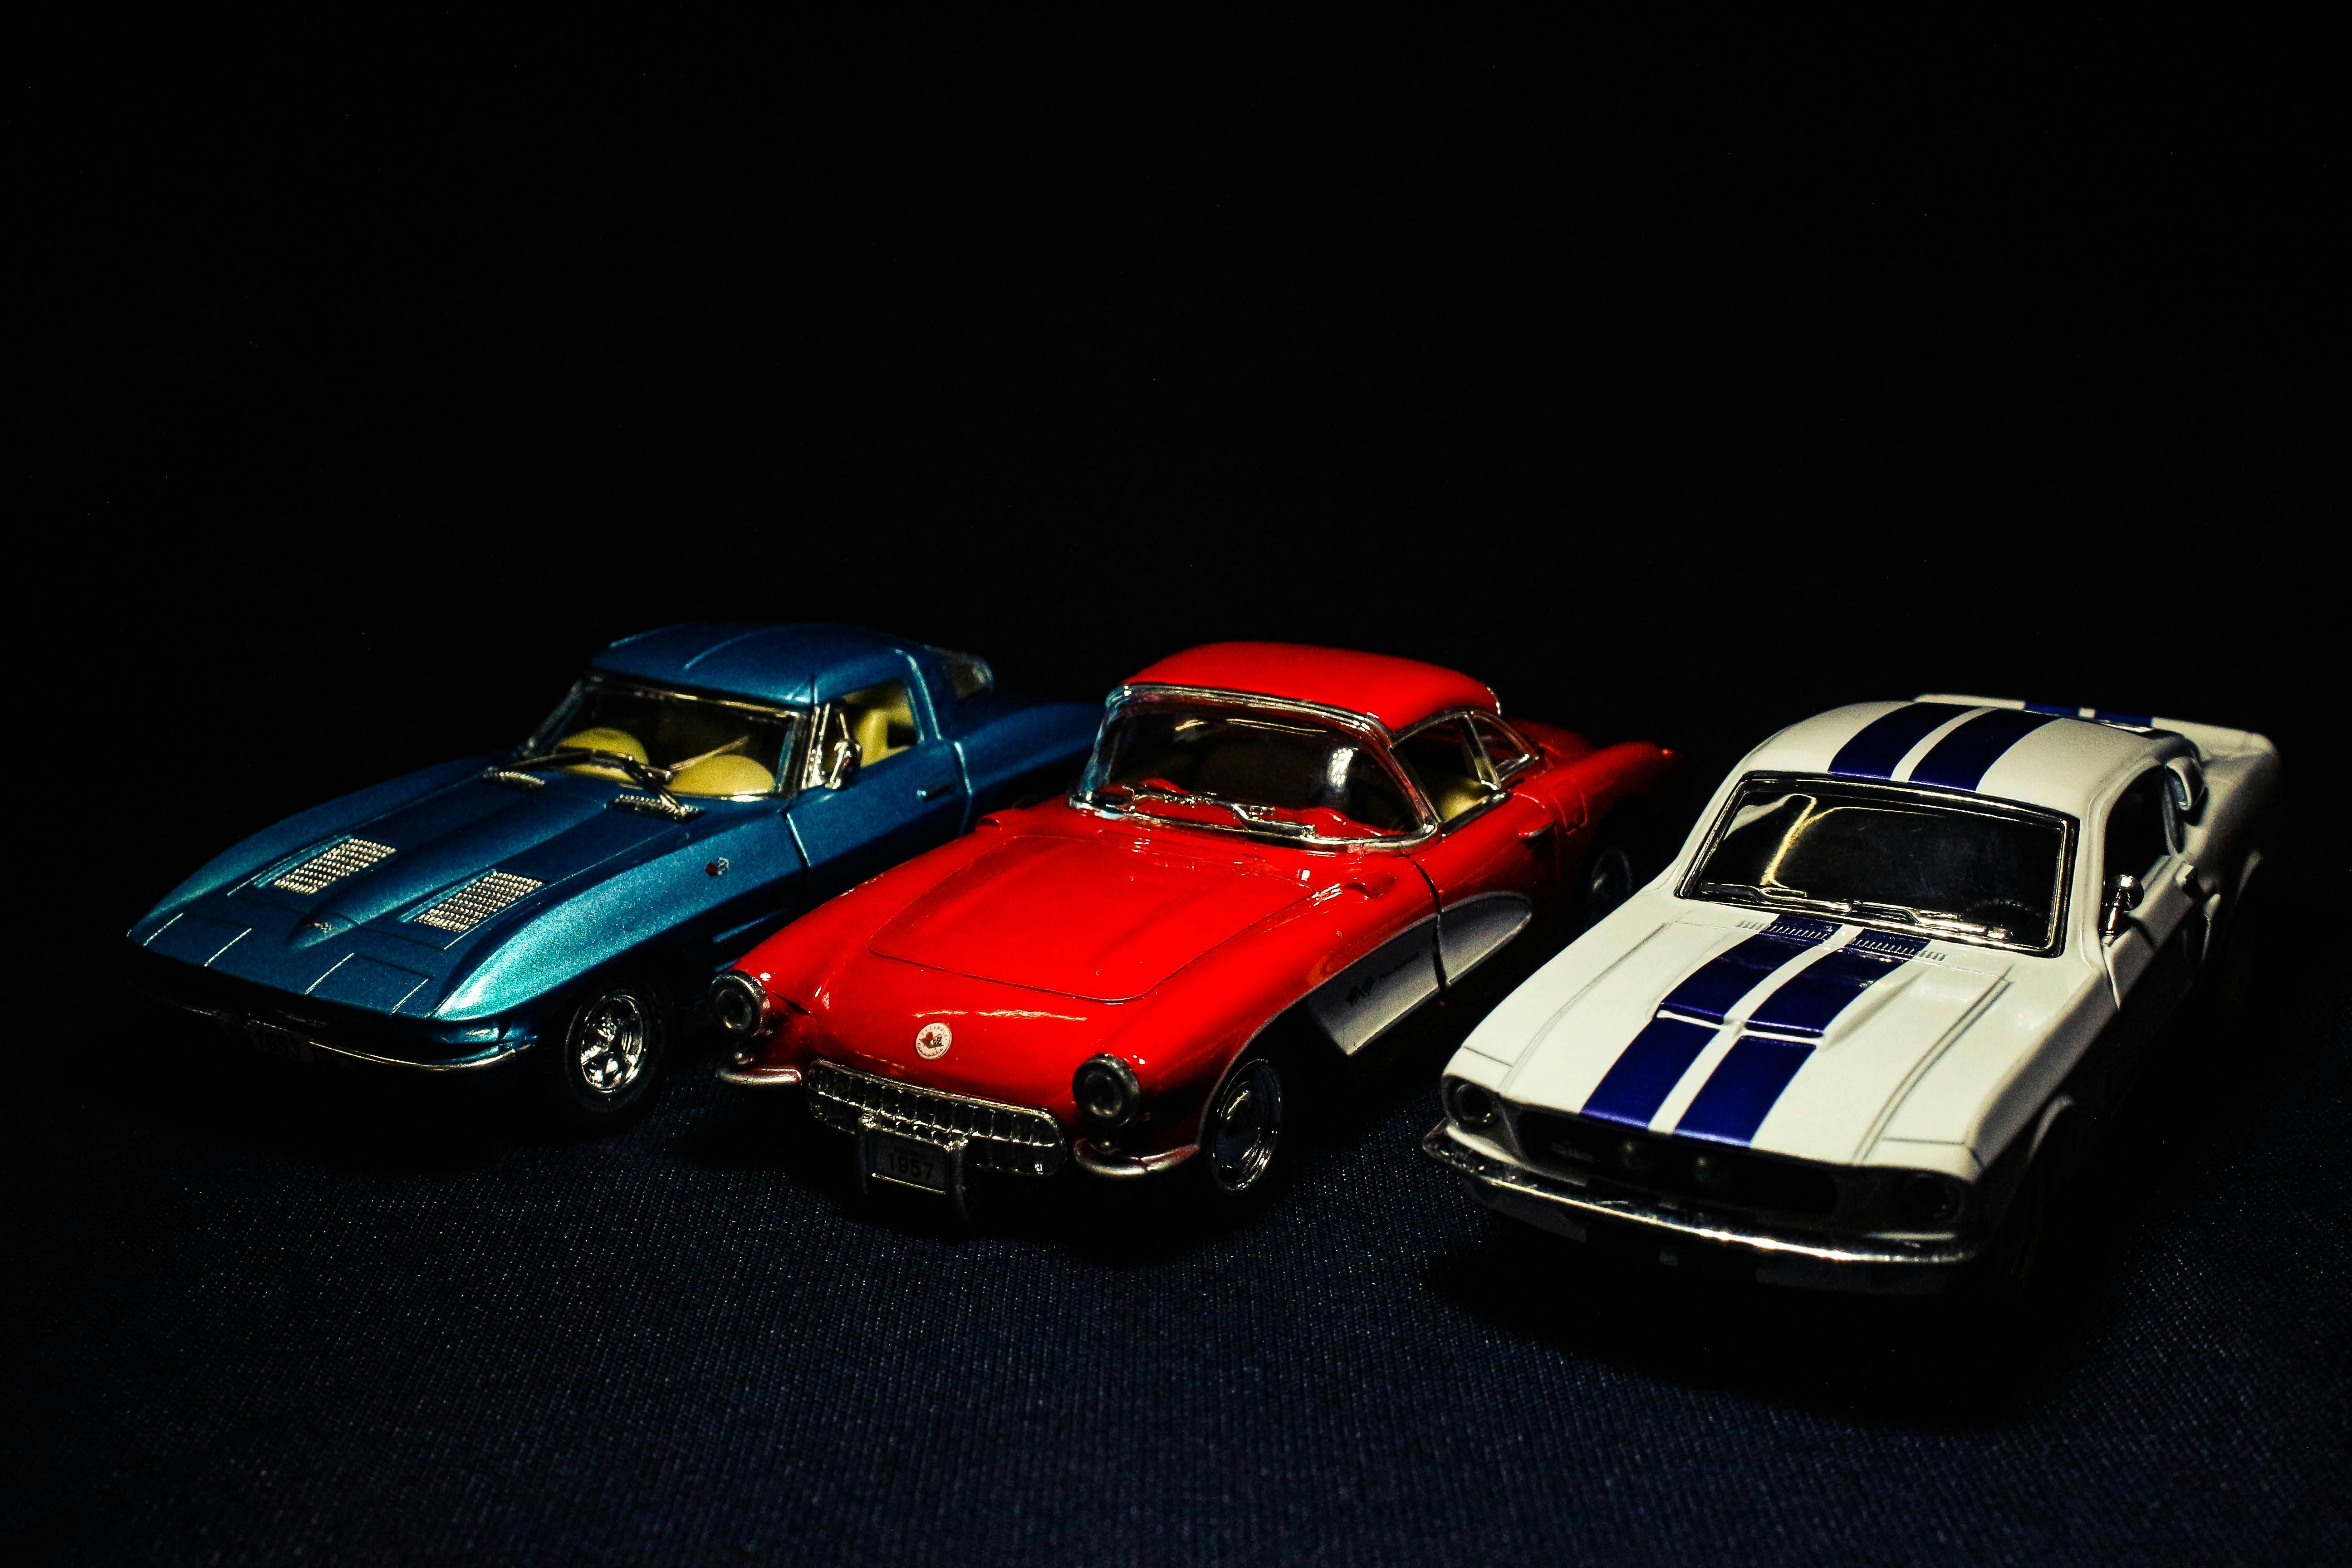 Free stock photo of cars, miniature toy, toy cars